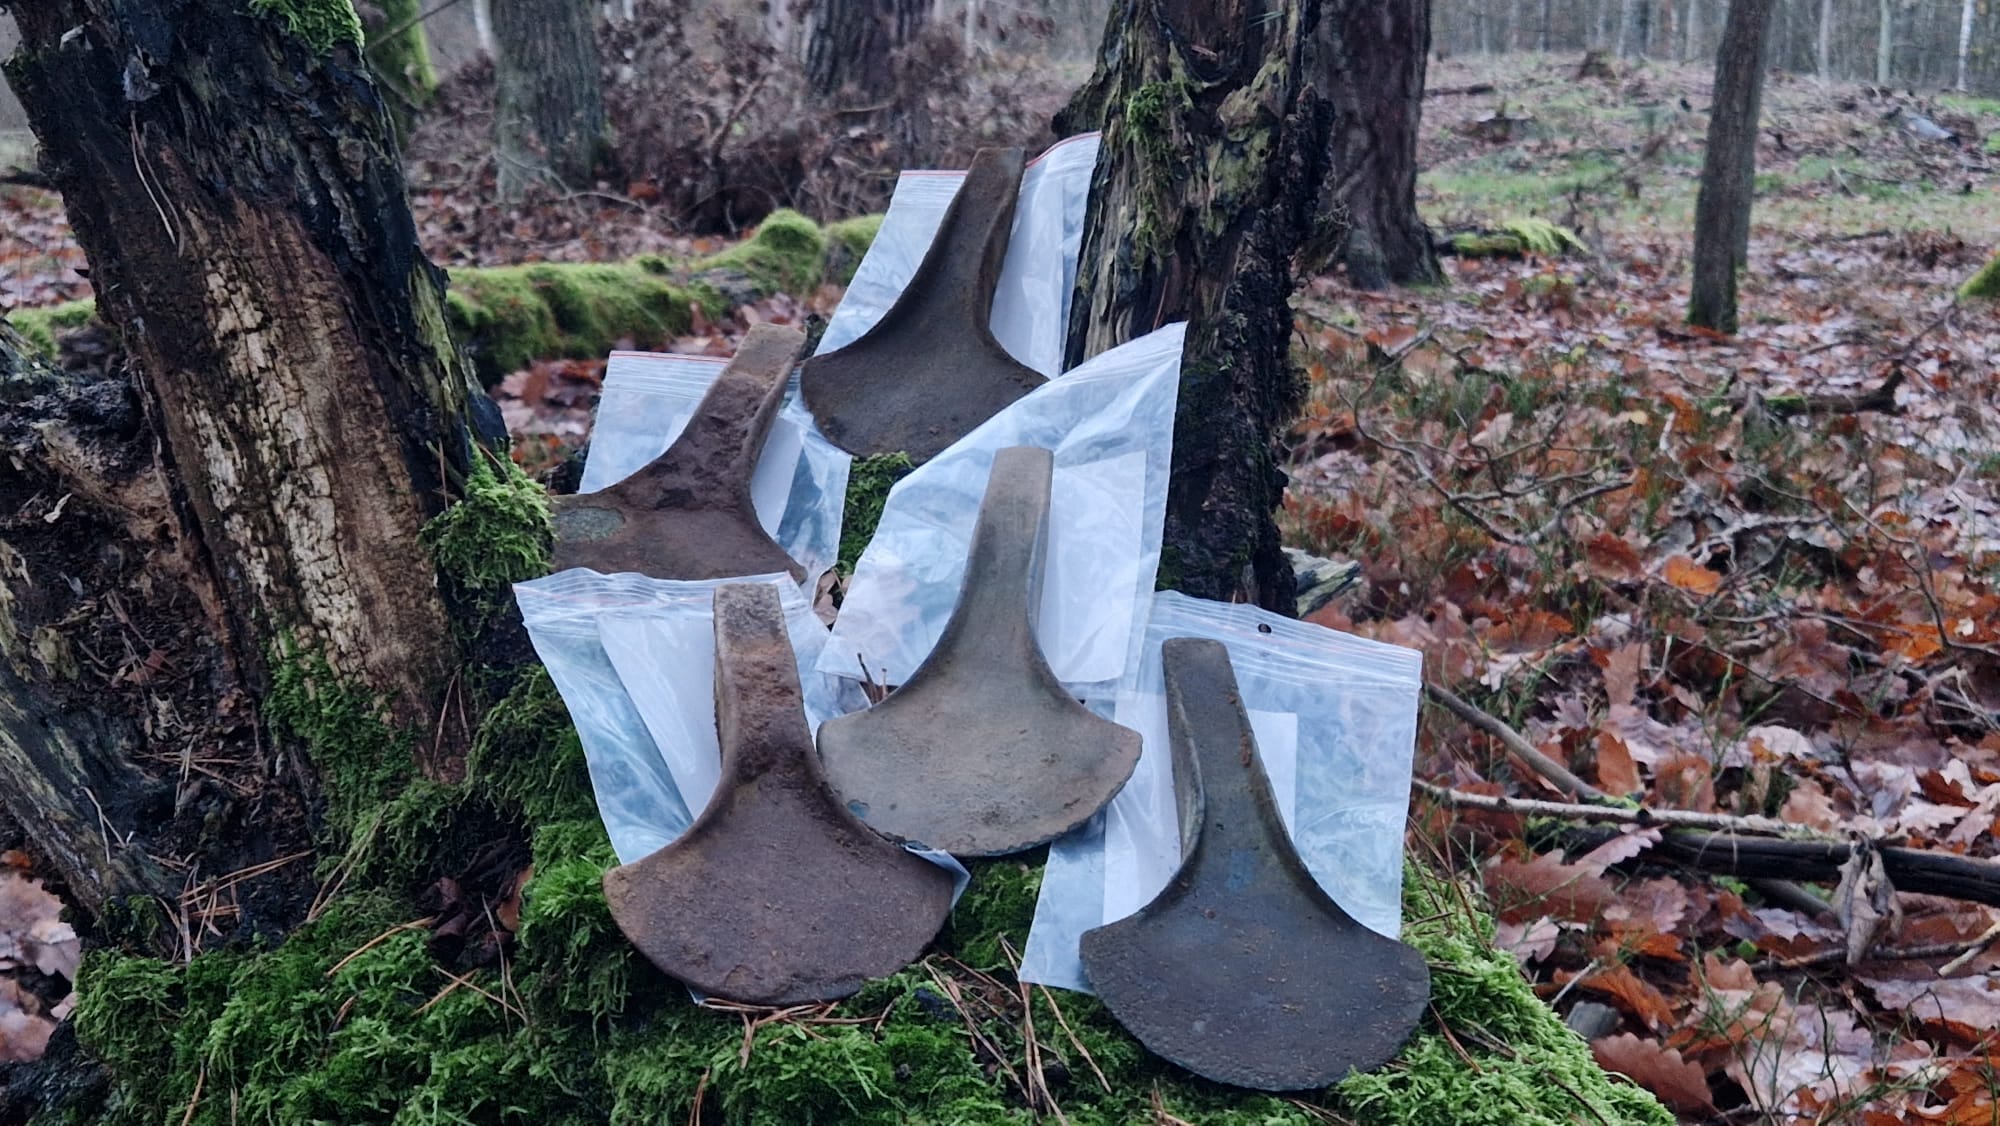 Five bronze age axes found in Kociewie